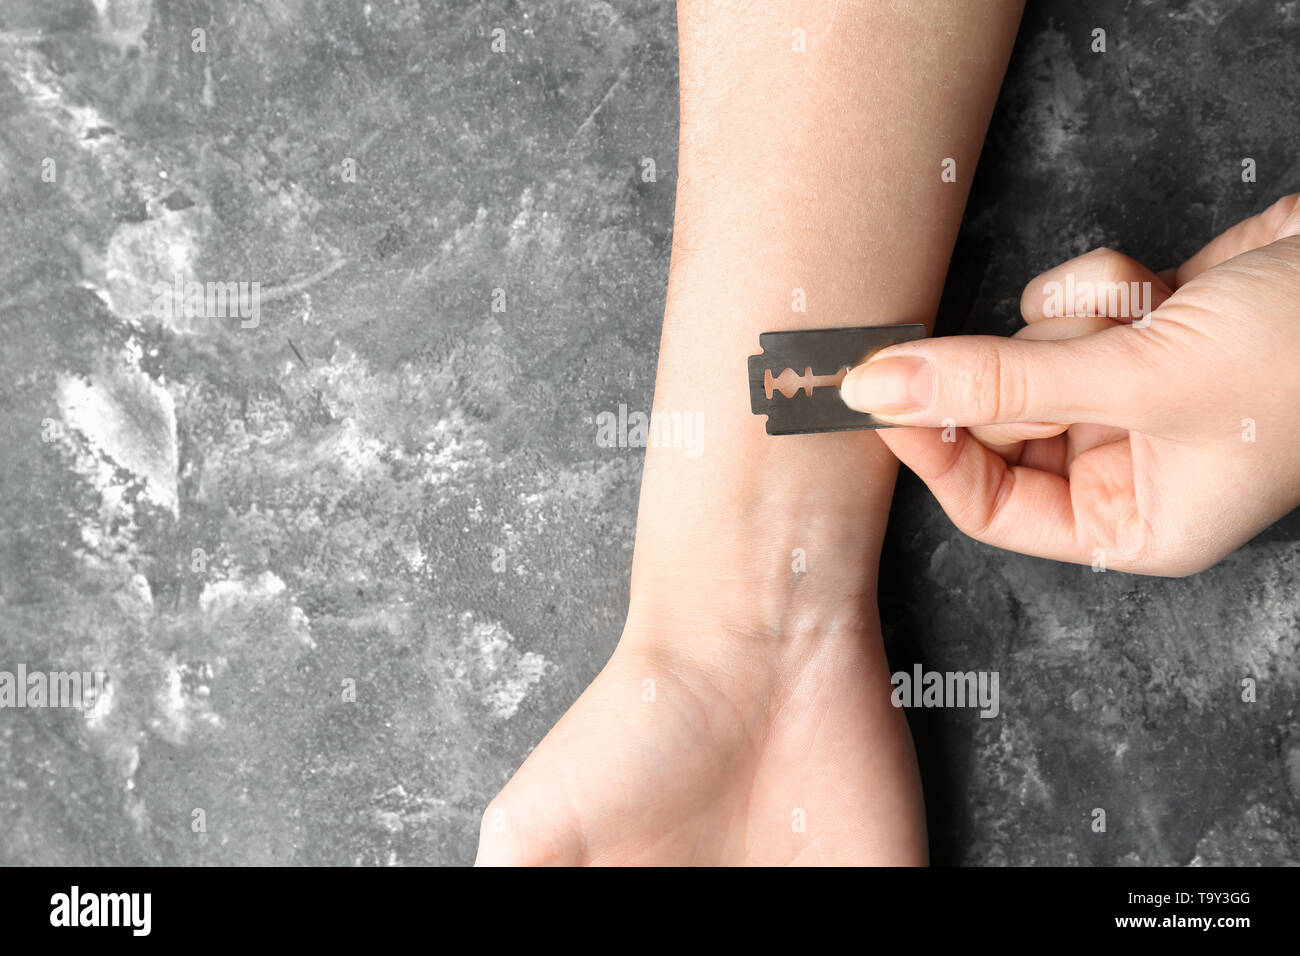 Woman cutting veins with razor blade on grey background. Suicide concept  Stock Photo - Alamy